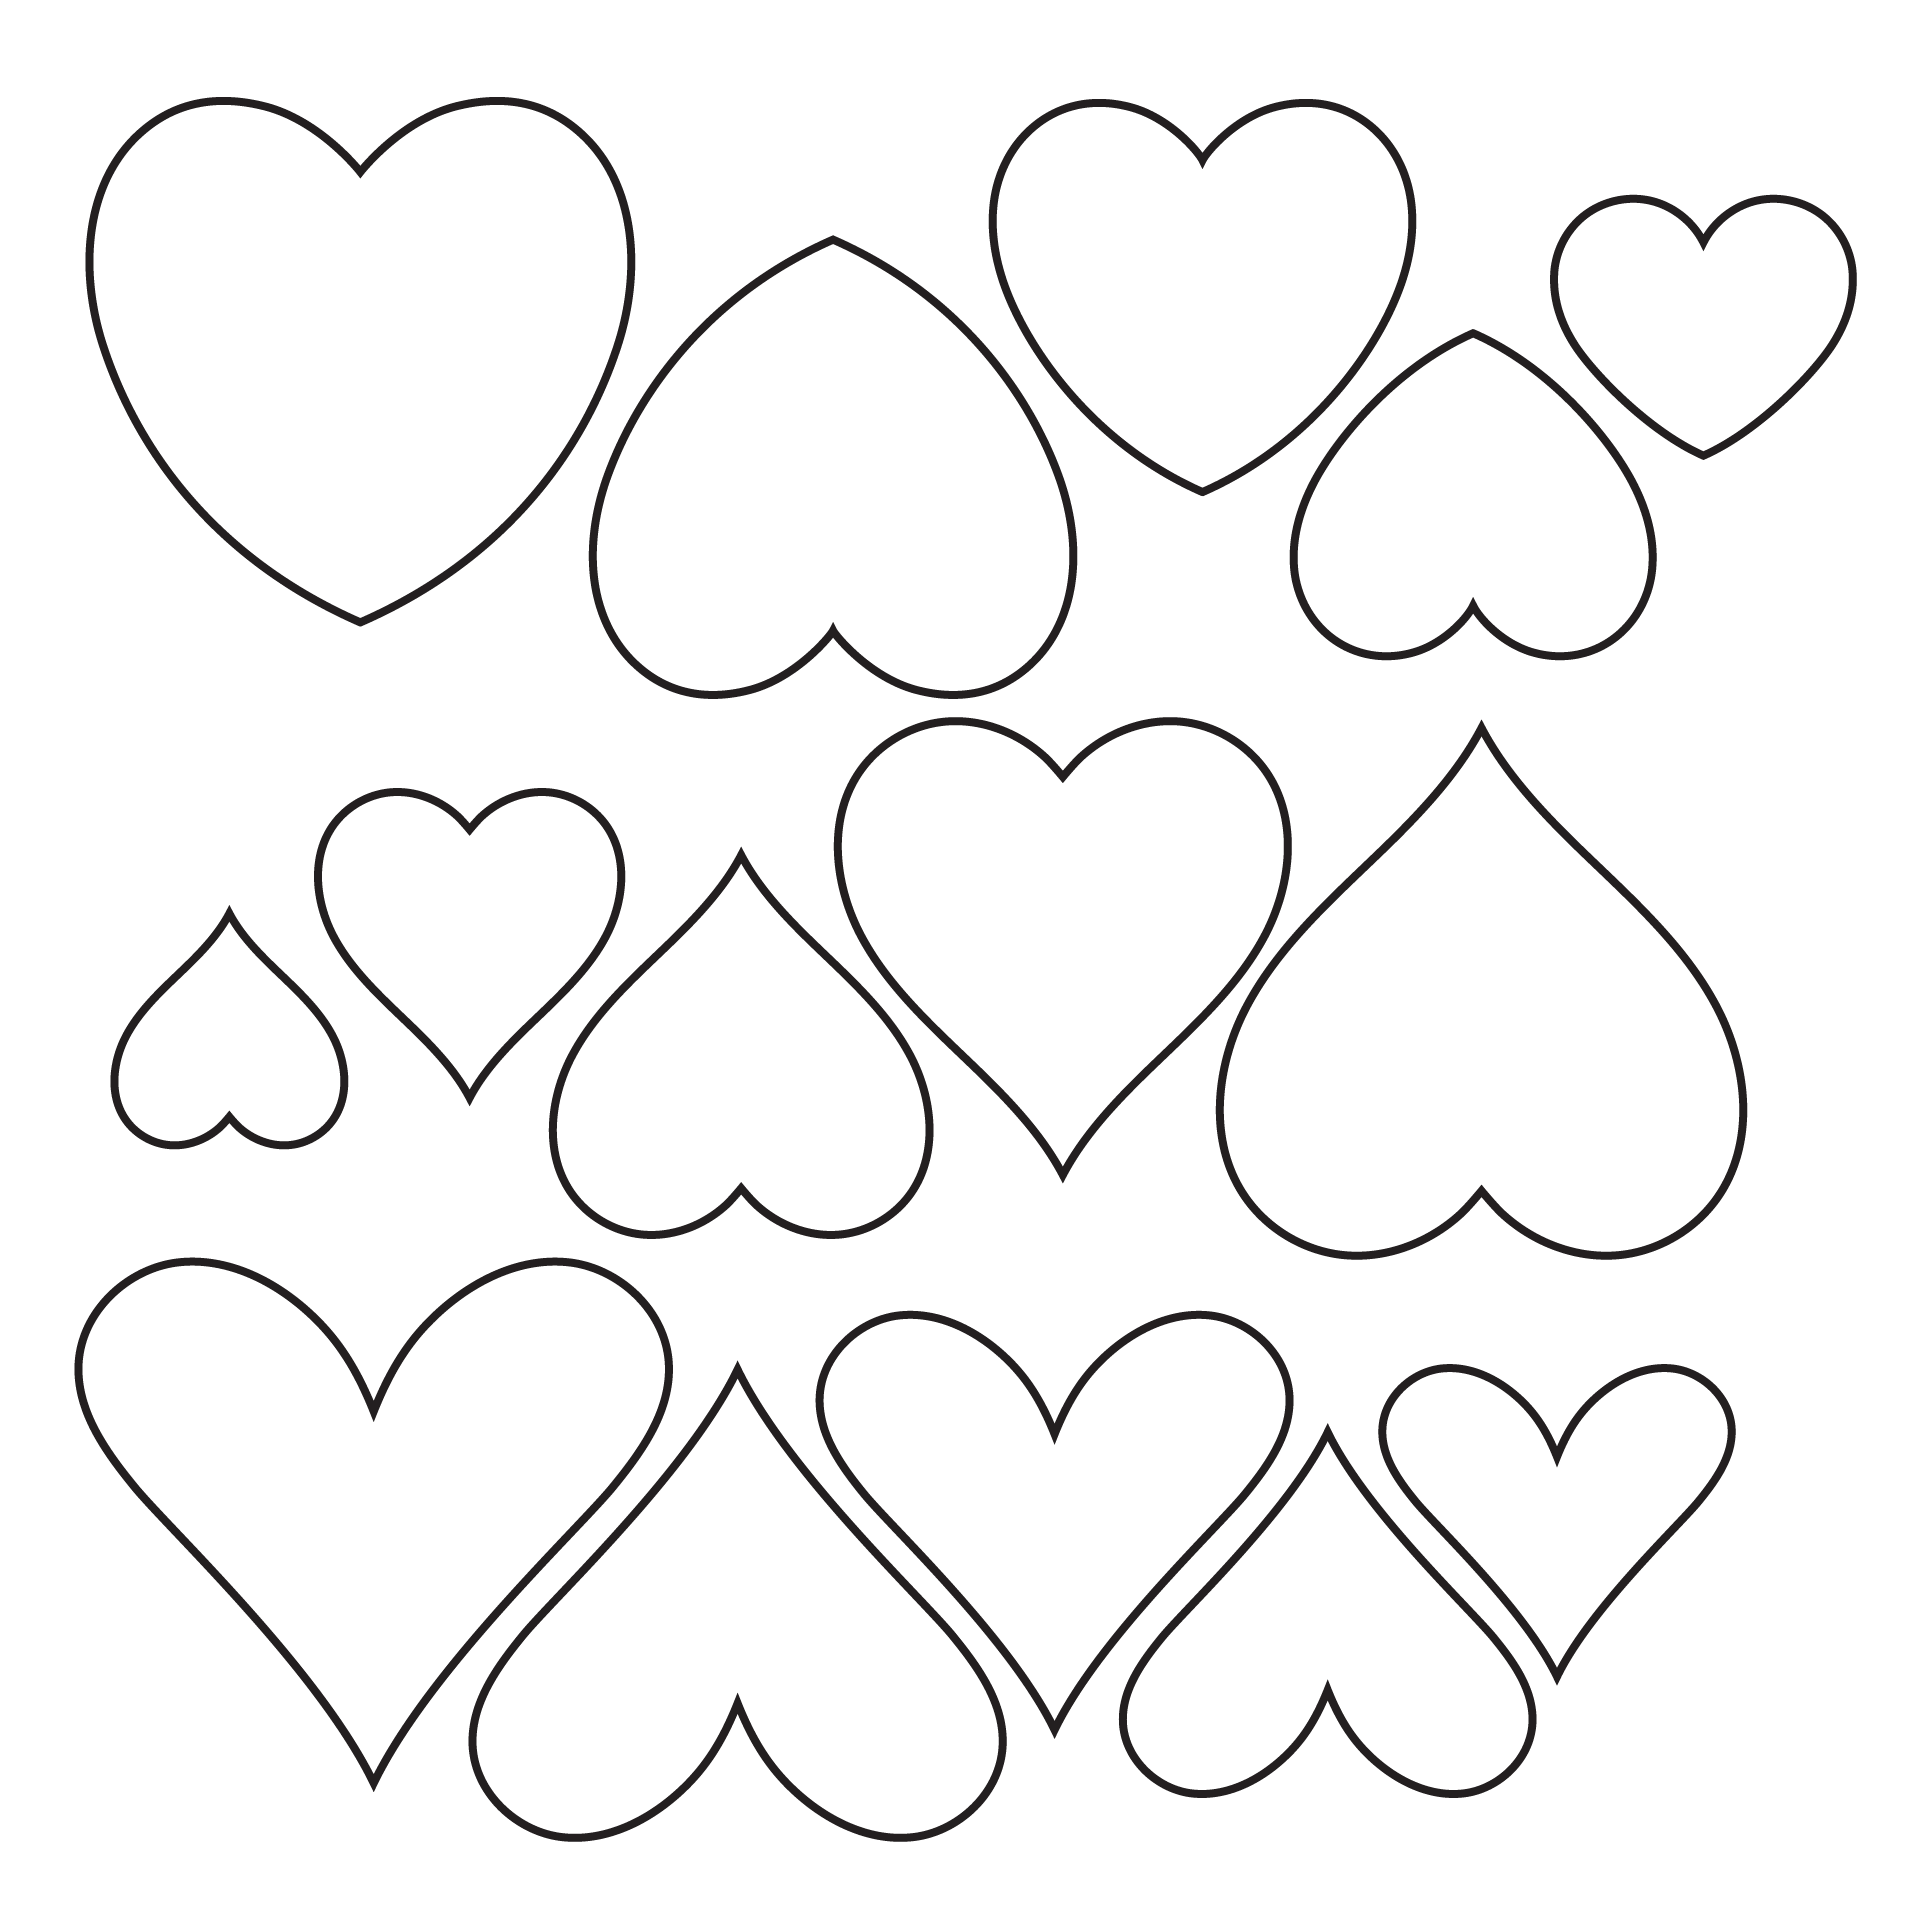 Heart Templates Of Different Sizes